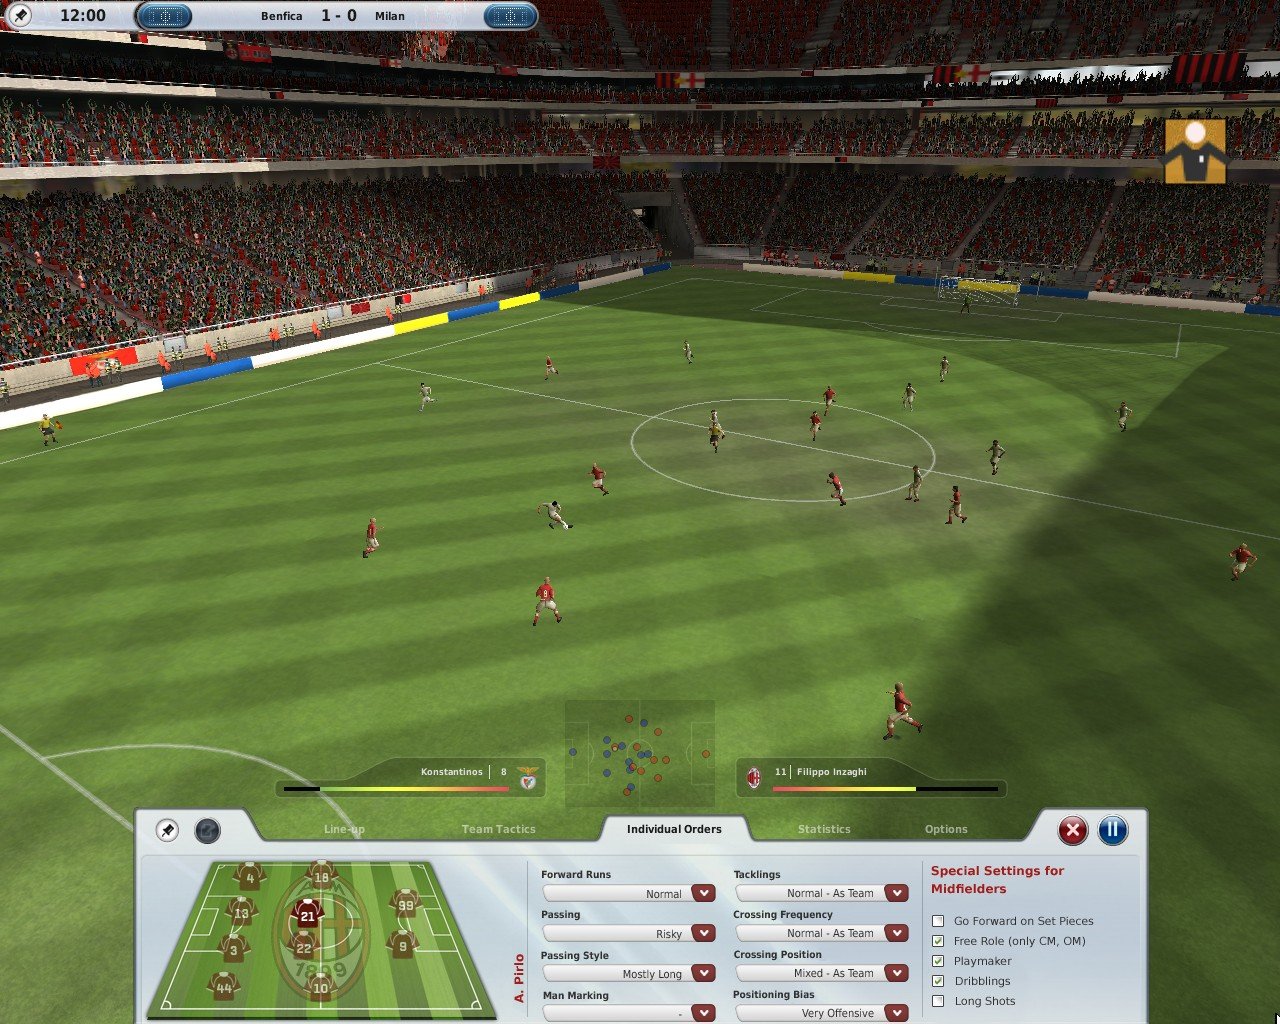 The match engine has been completely revamped, borrowing technology and assets from EA Sports stablemate FIFA 09.